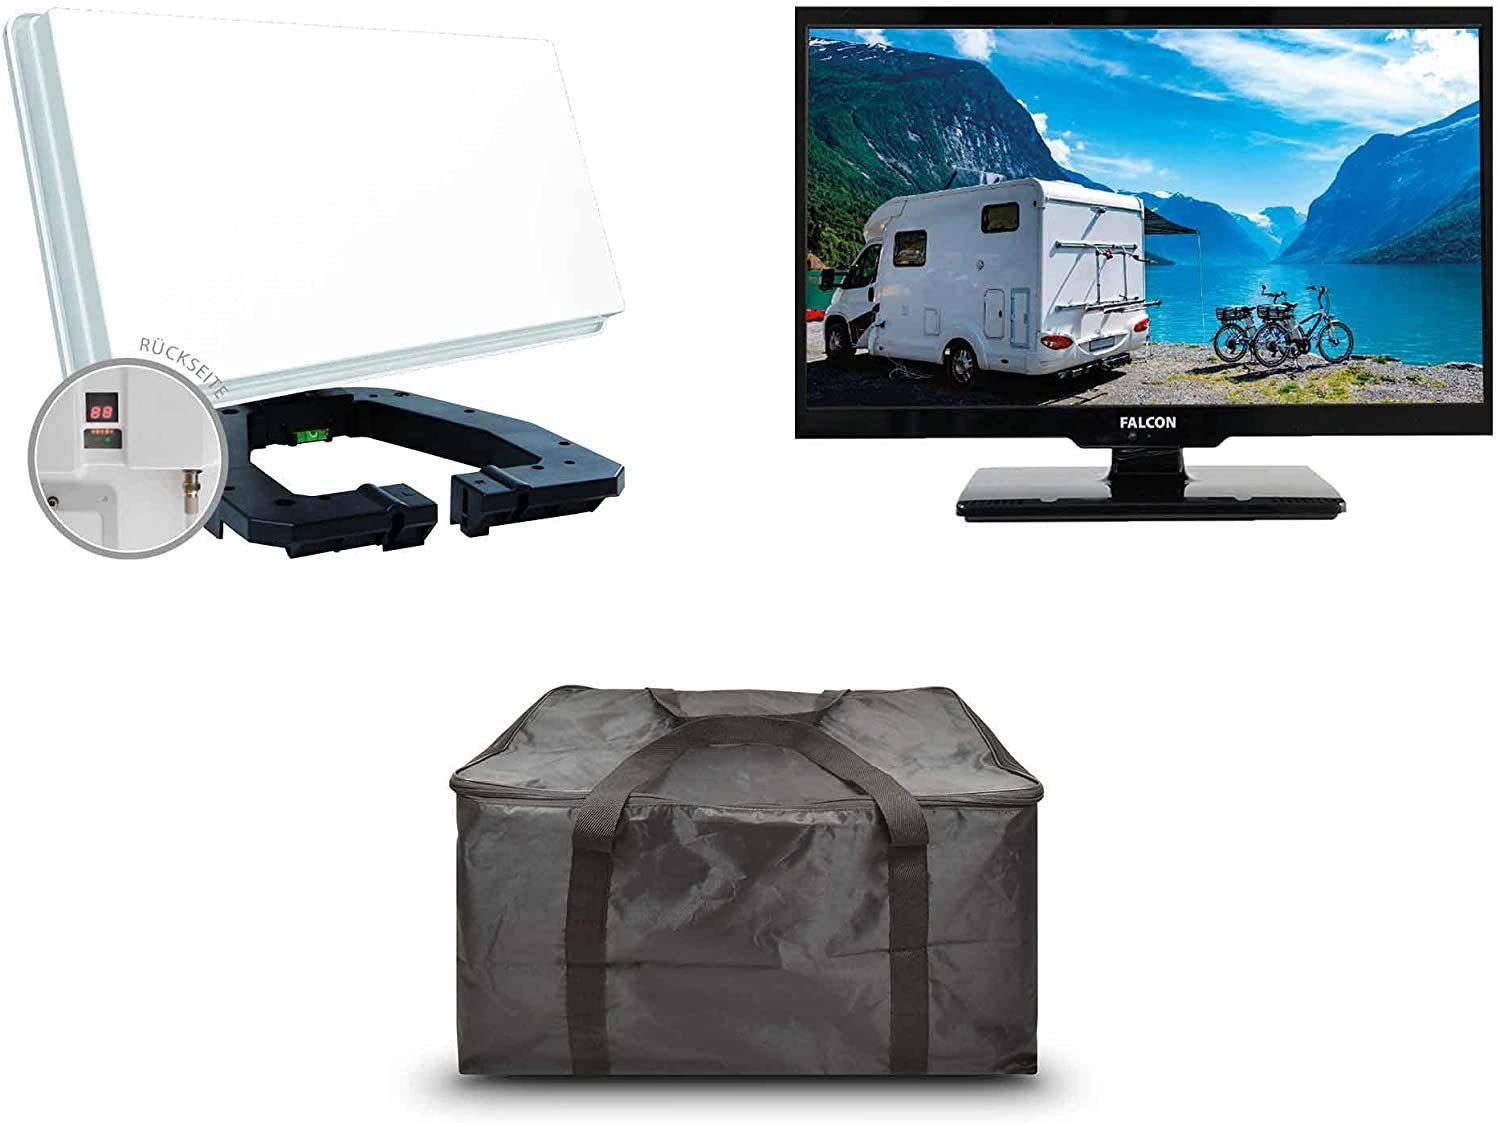 19" Camping Kit Sat-Anlage Traveller Falcon (48,26 Camping HDReady EasyFind cm, TV II Microelectronic Set